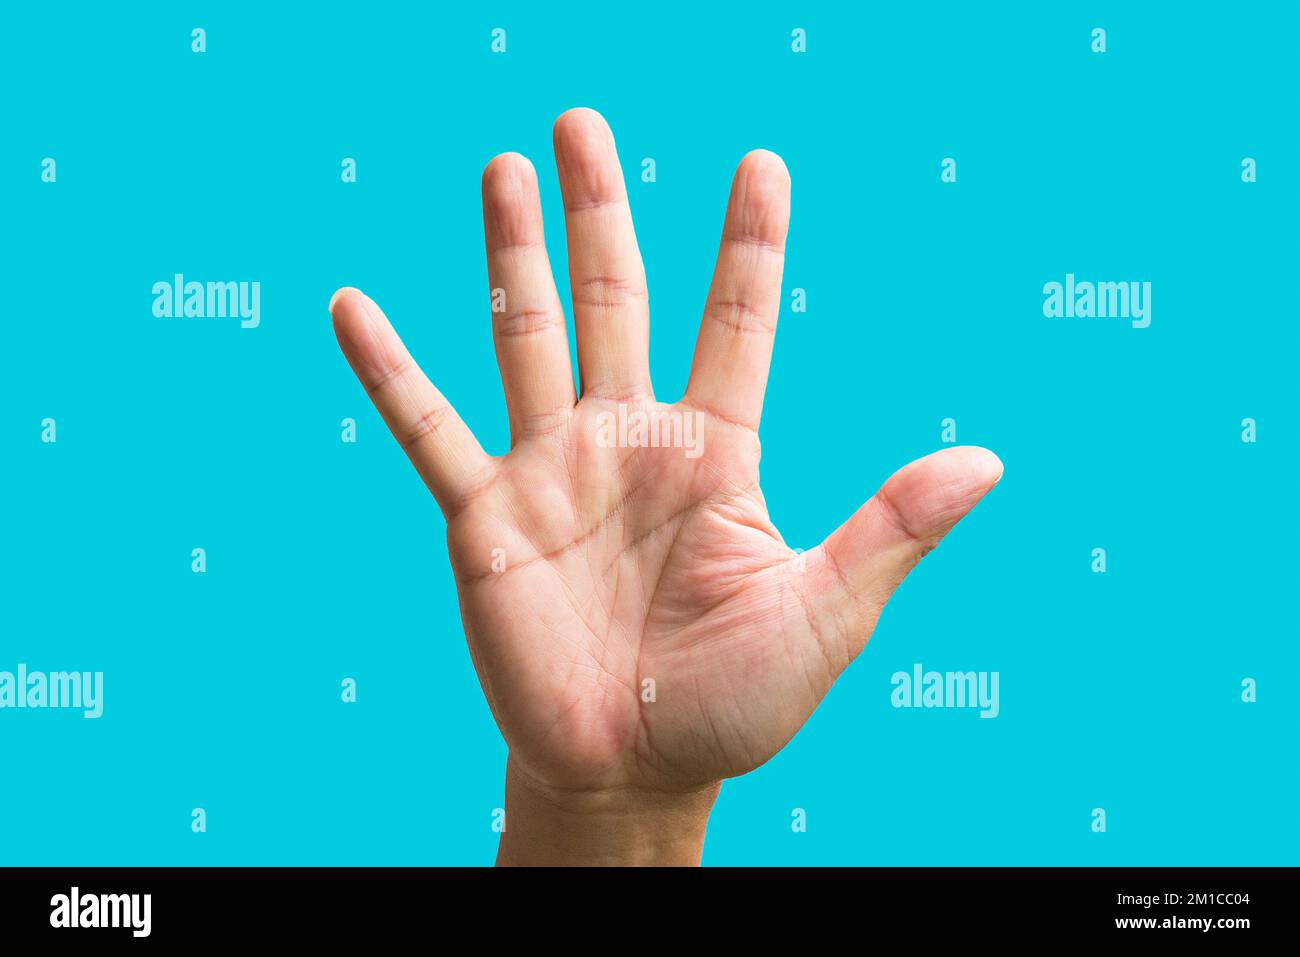 Palm Of A Male Hand Showing Five Fingers Pointing Up On Blue